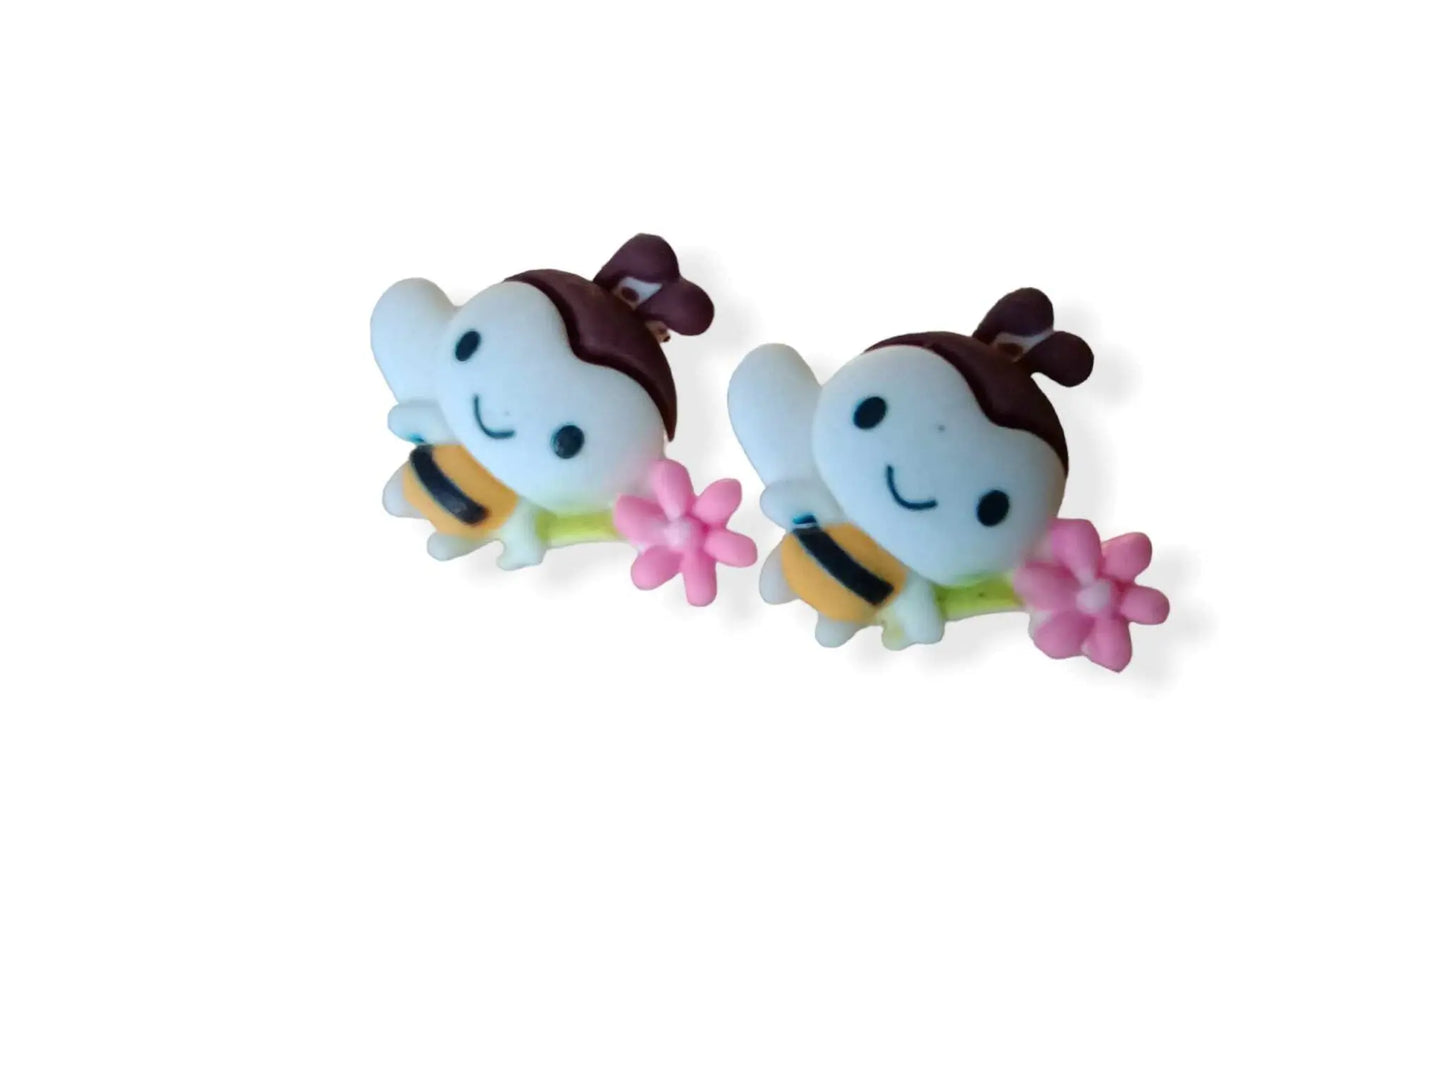 Buzzing Bee Resin Earrings - Quirky & Fun Novelty Jewellery for Nature Lovers